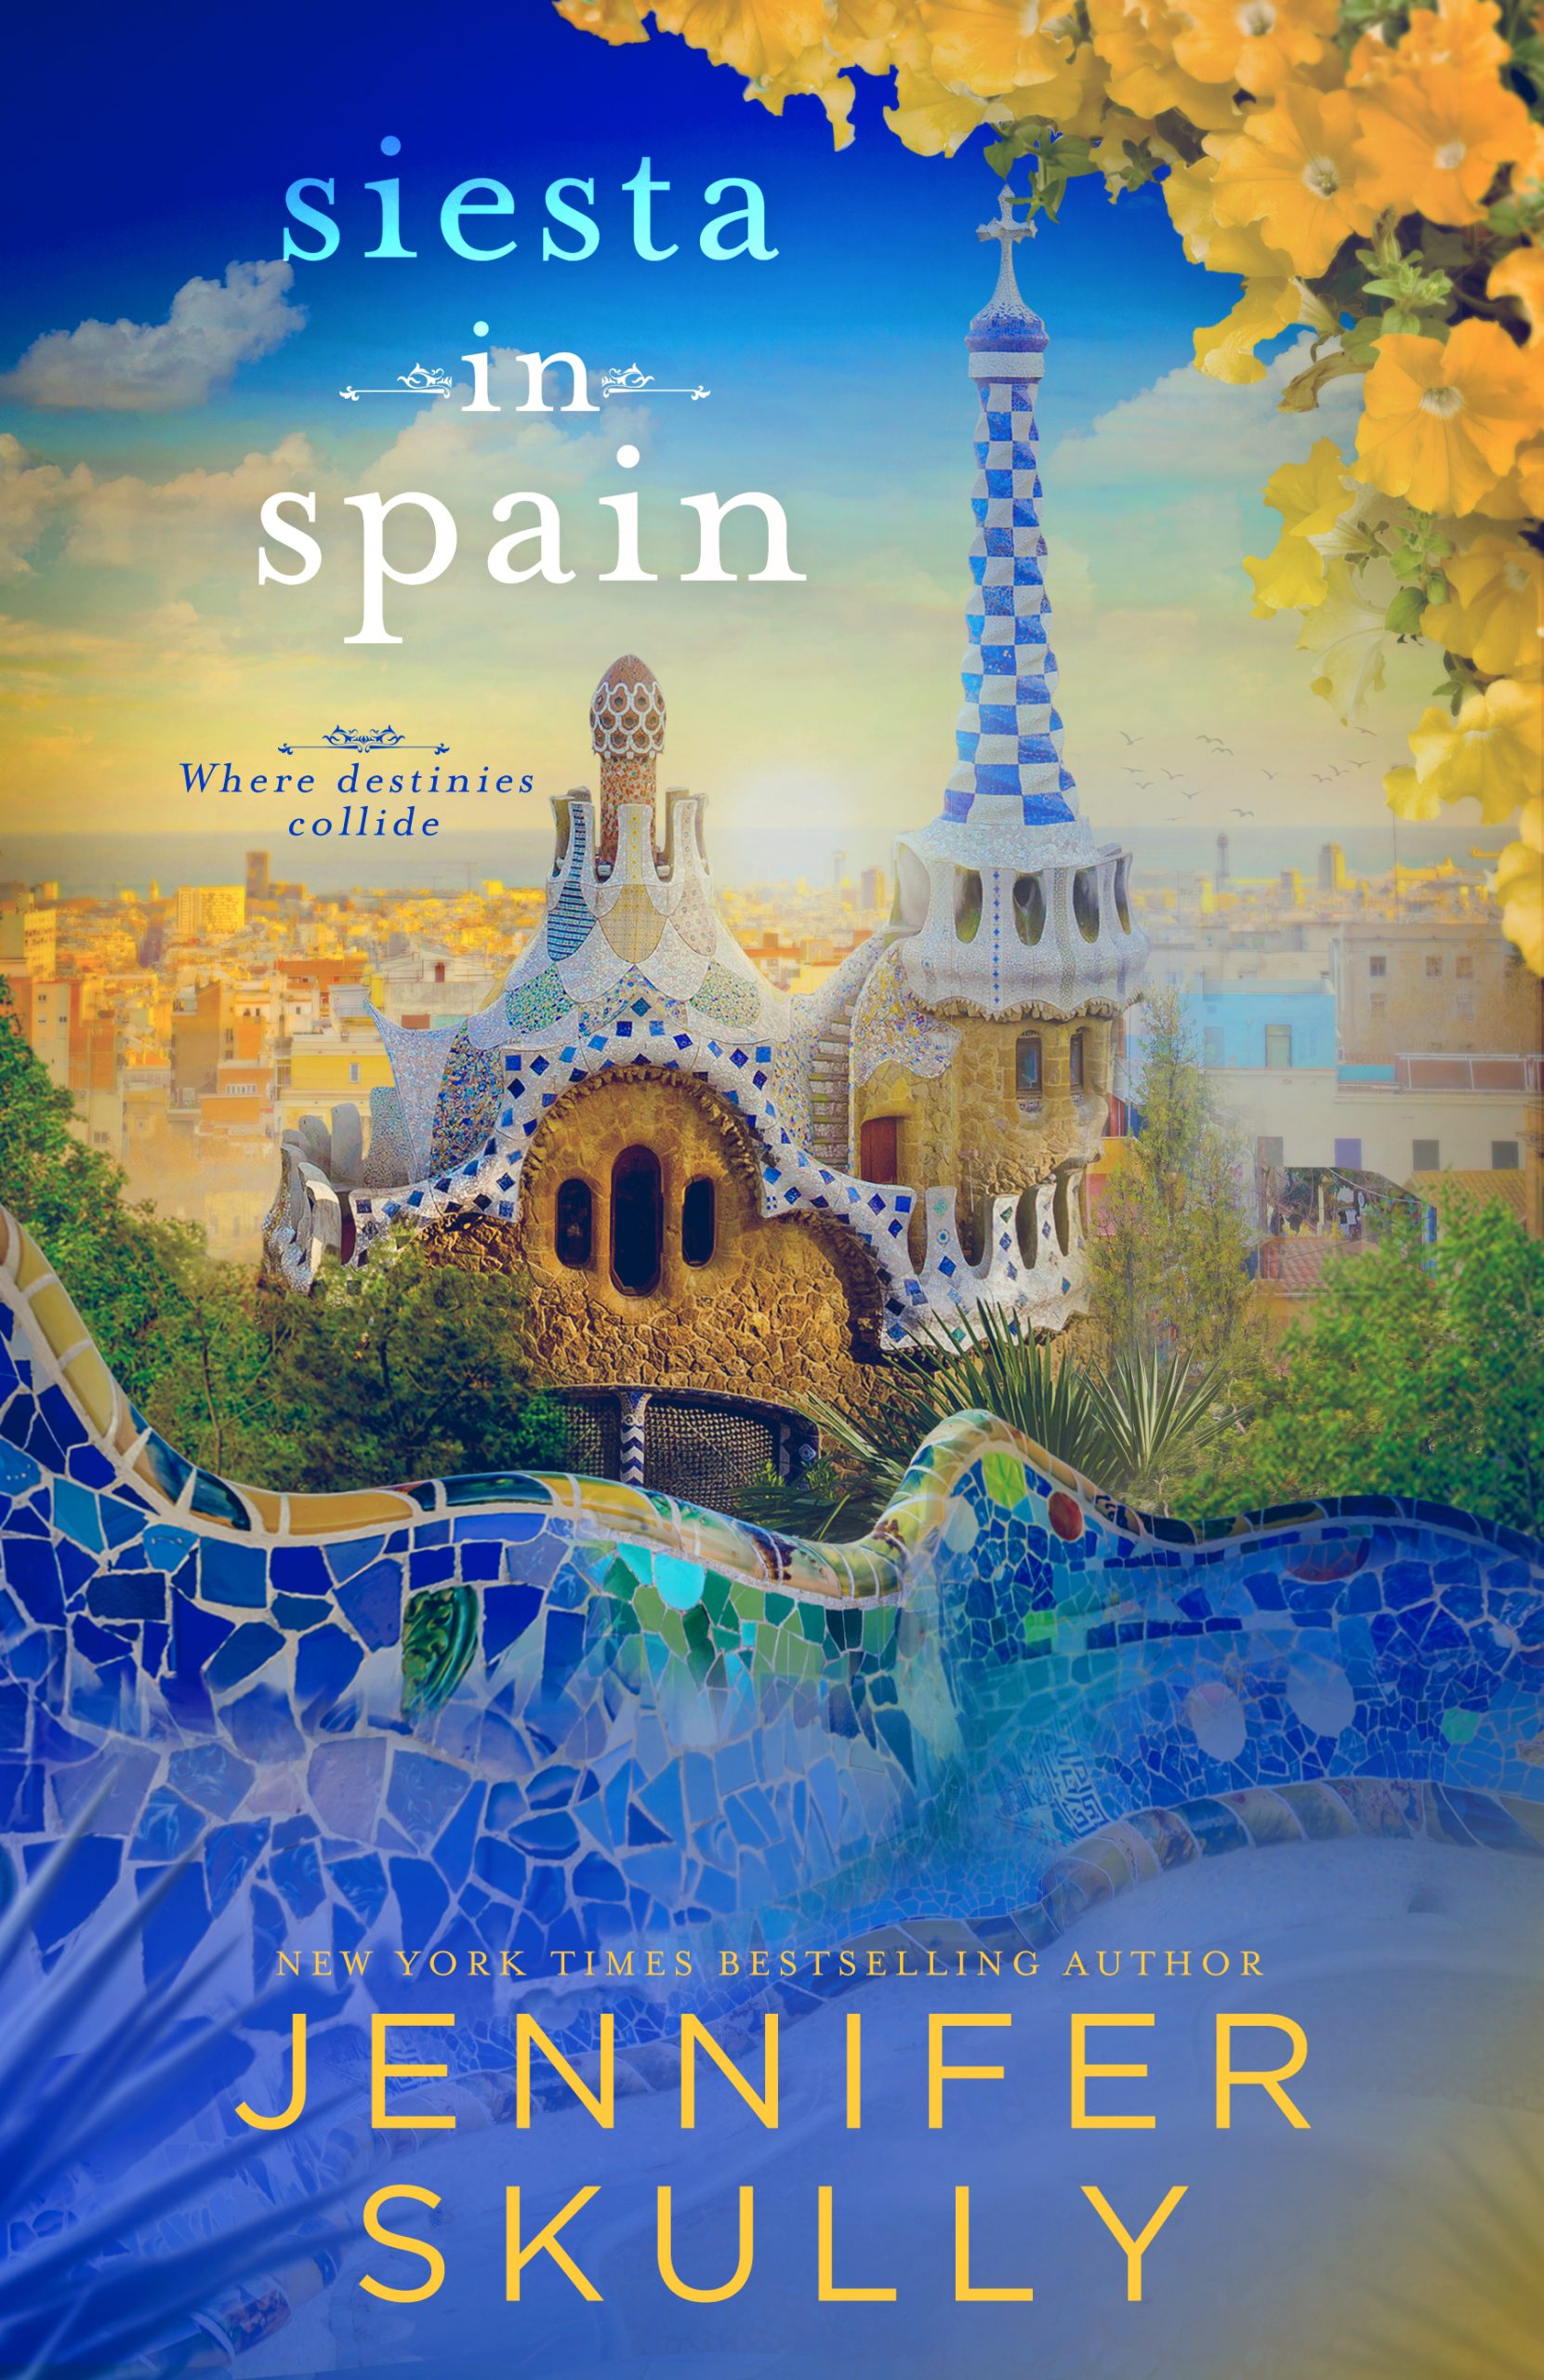 Cover of Siesta in Spain - where destinies collide - by New York Times Bestselling Author Jennifer Skully